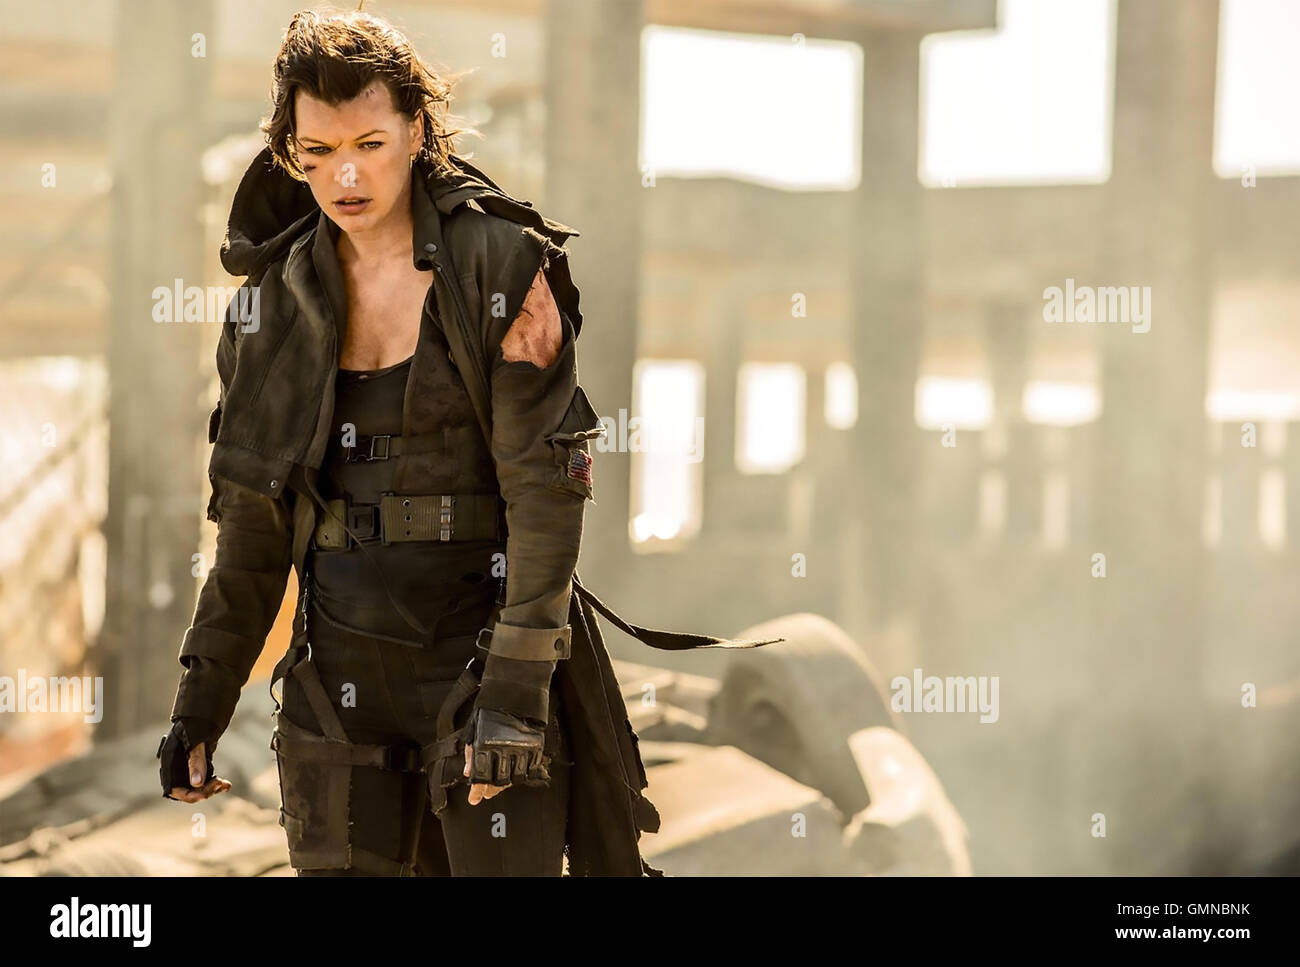 RESIDENT EVIL: THE FINAL CHAPTER 2016 Capcom Entertainment film with Milla Jovovich Stock Photo